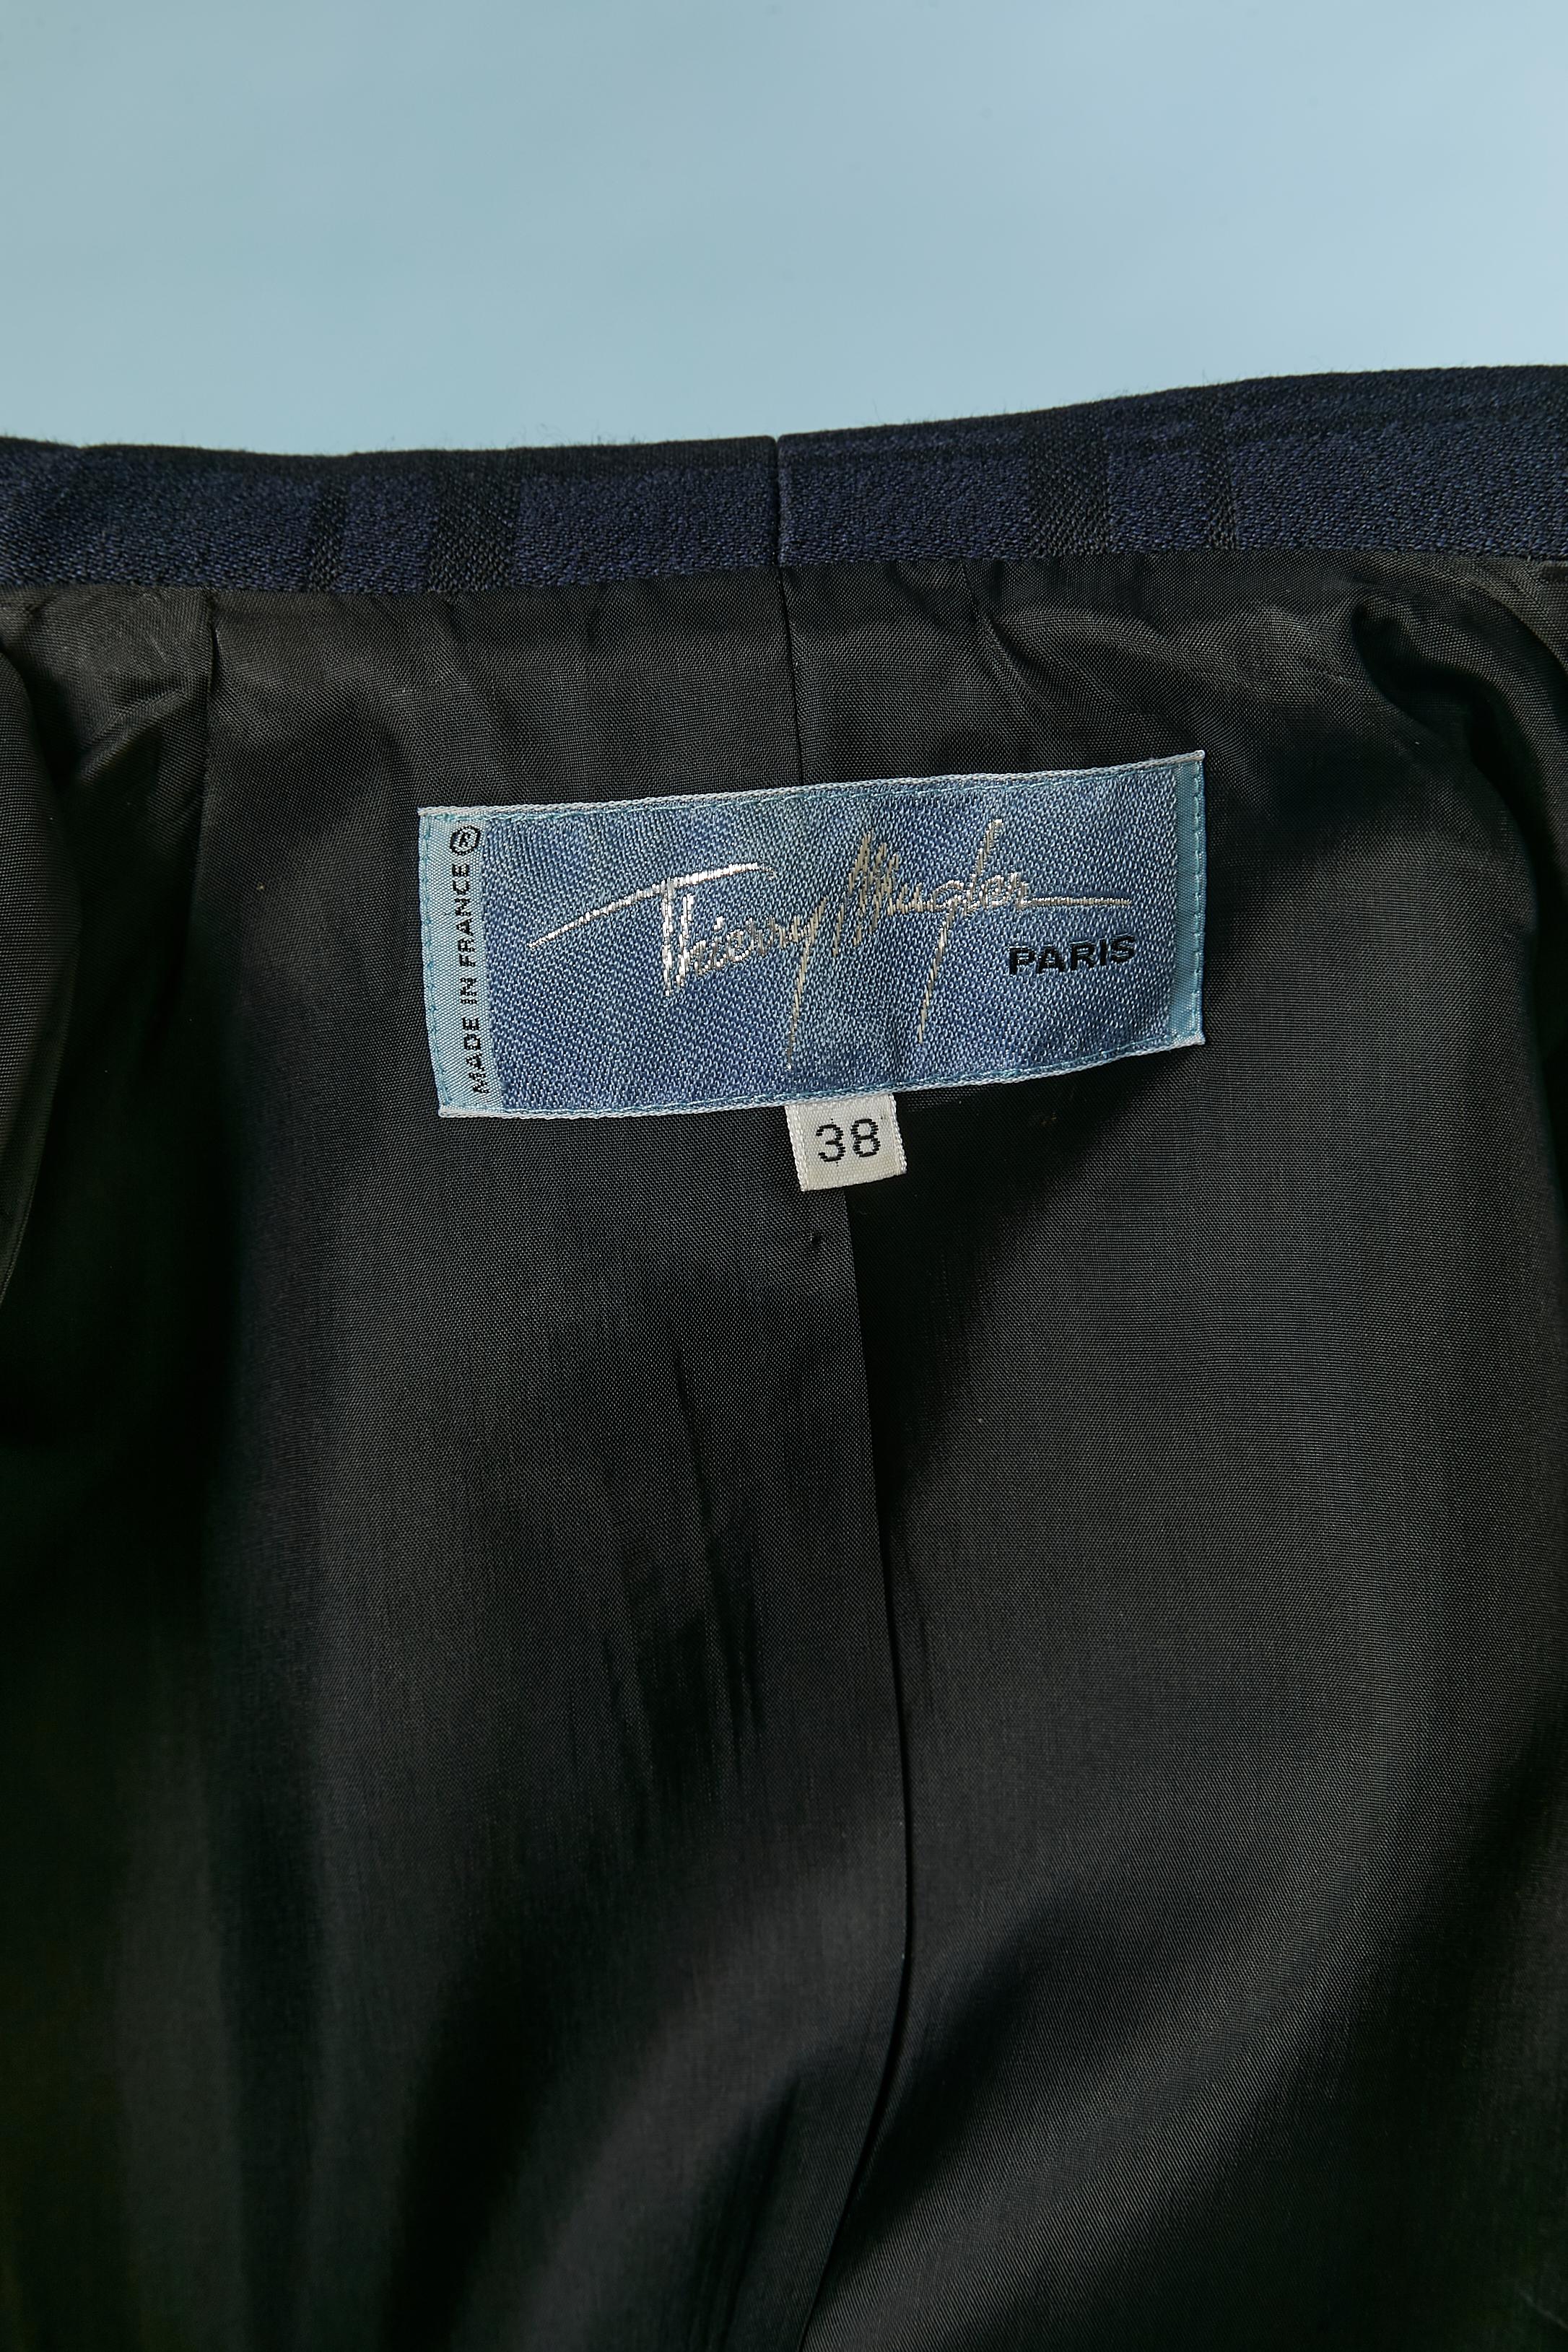 Navy blue and black check pattern jacquard skirt-suit Thierry Mugler Circa 1990 For Sale 4